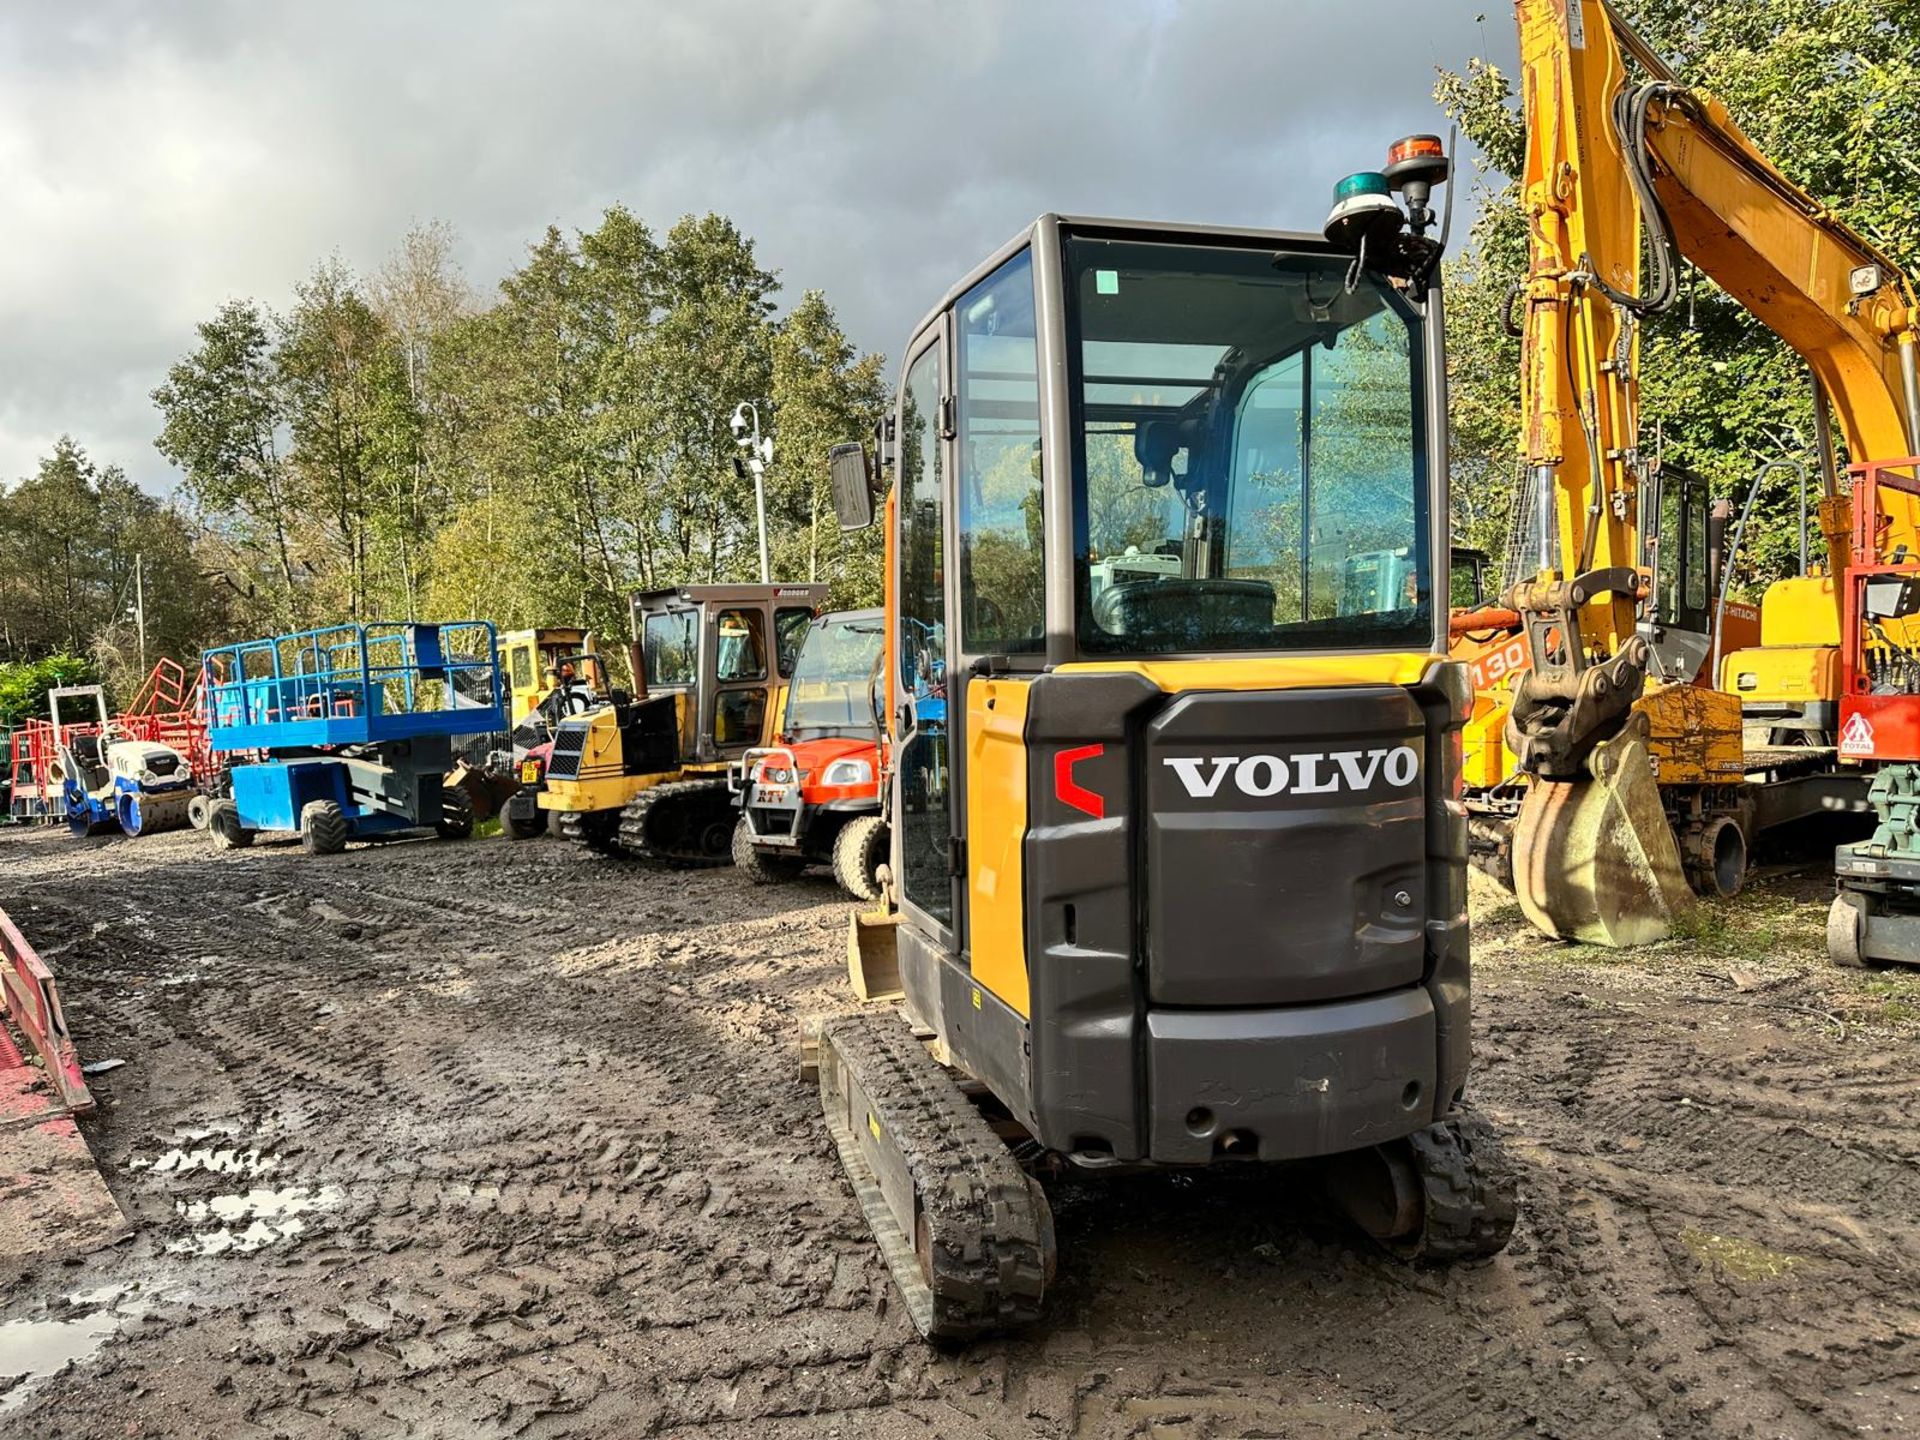 2018 VOLVO EC18E MINI EXCAVATOR - RUNS DRIVES AND WORKS WELL - SHOWING A LOW 1801 HOURS!  - Image 17 of 21